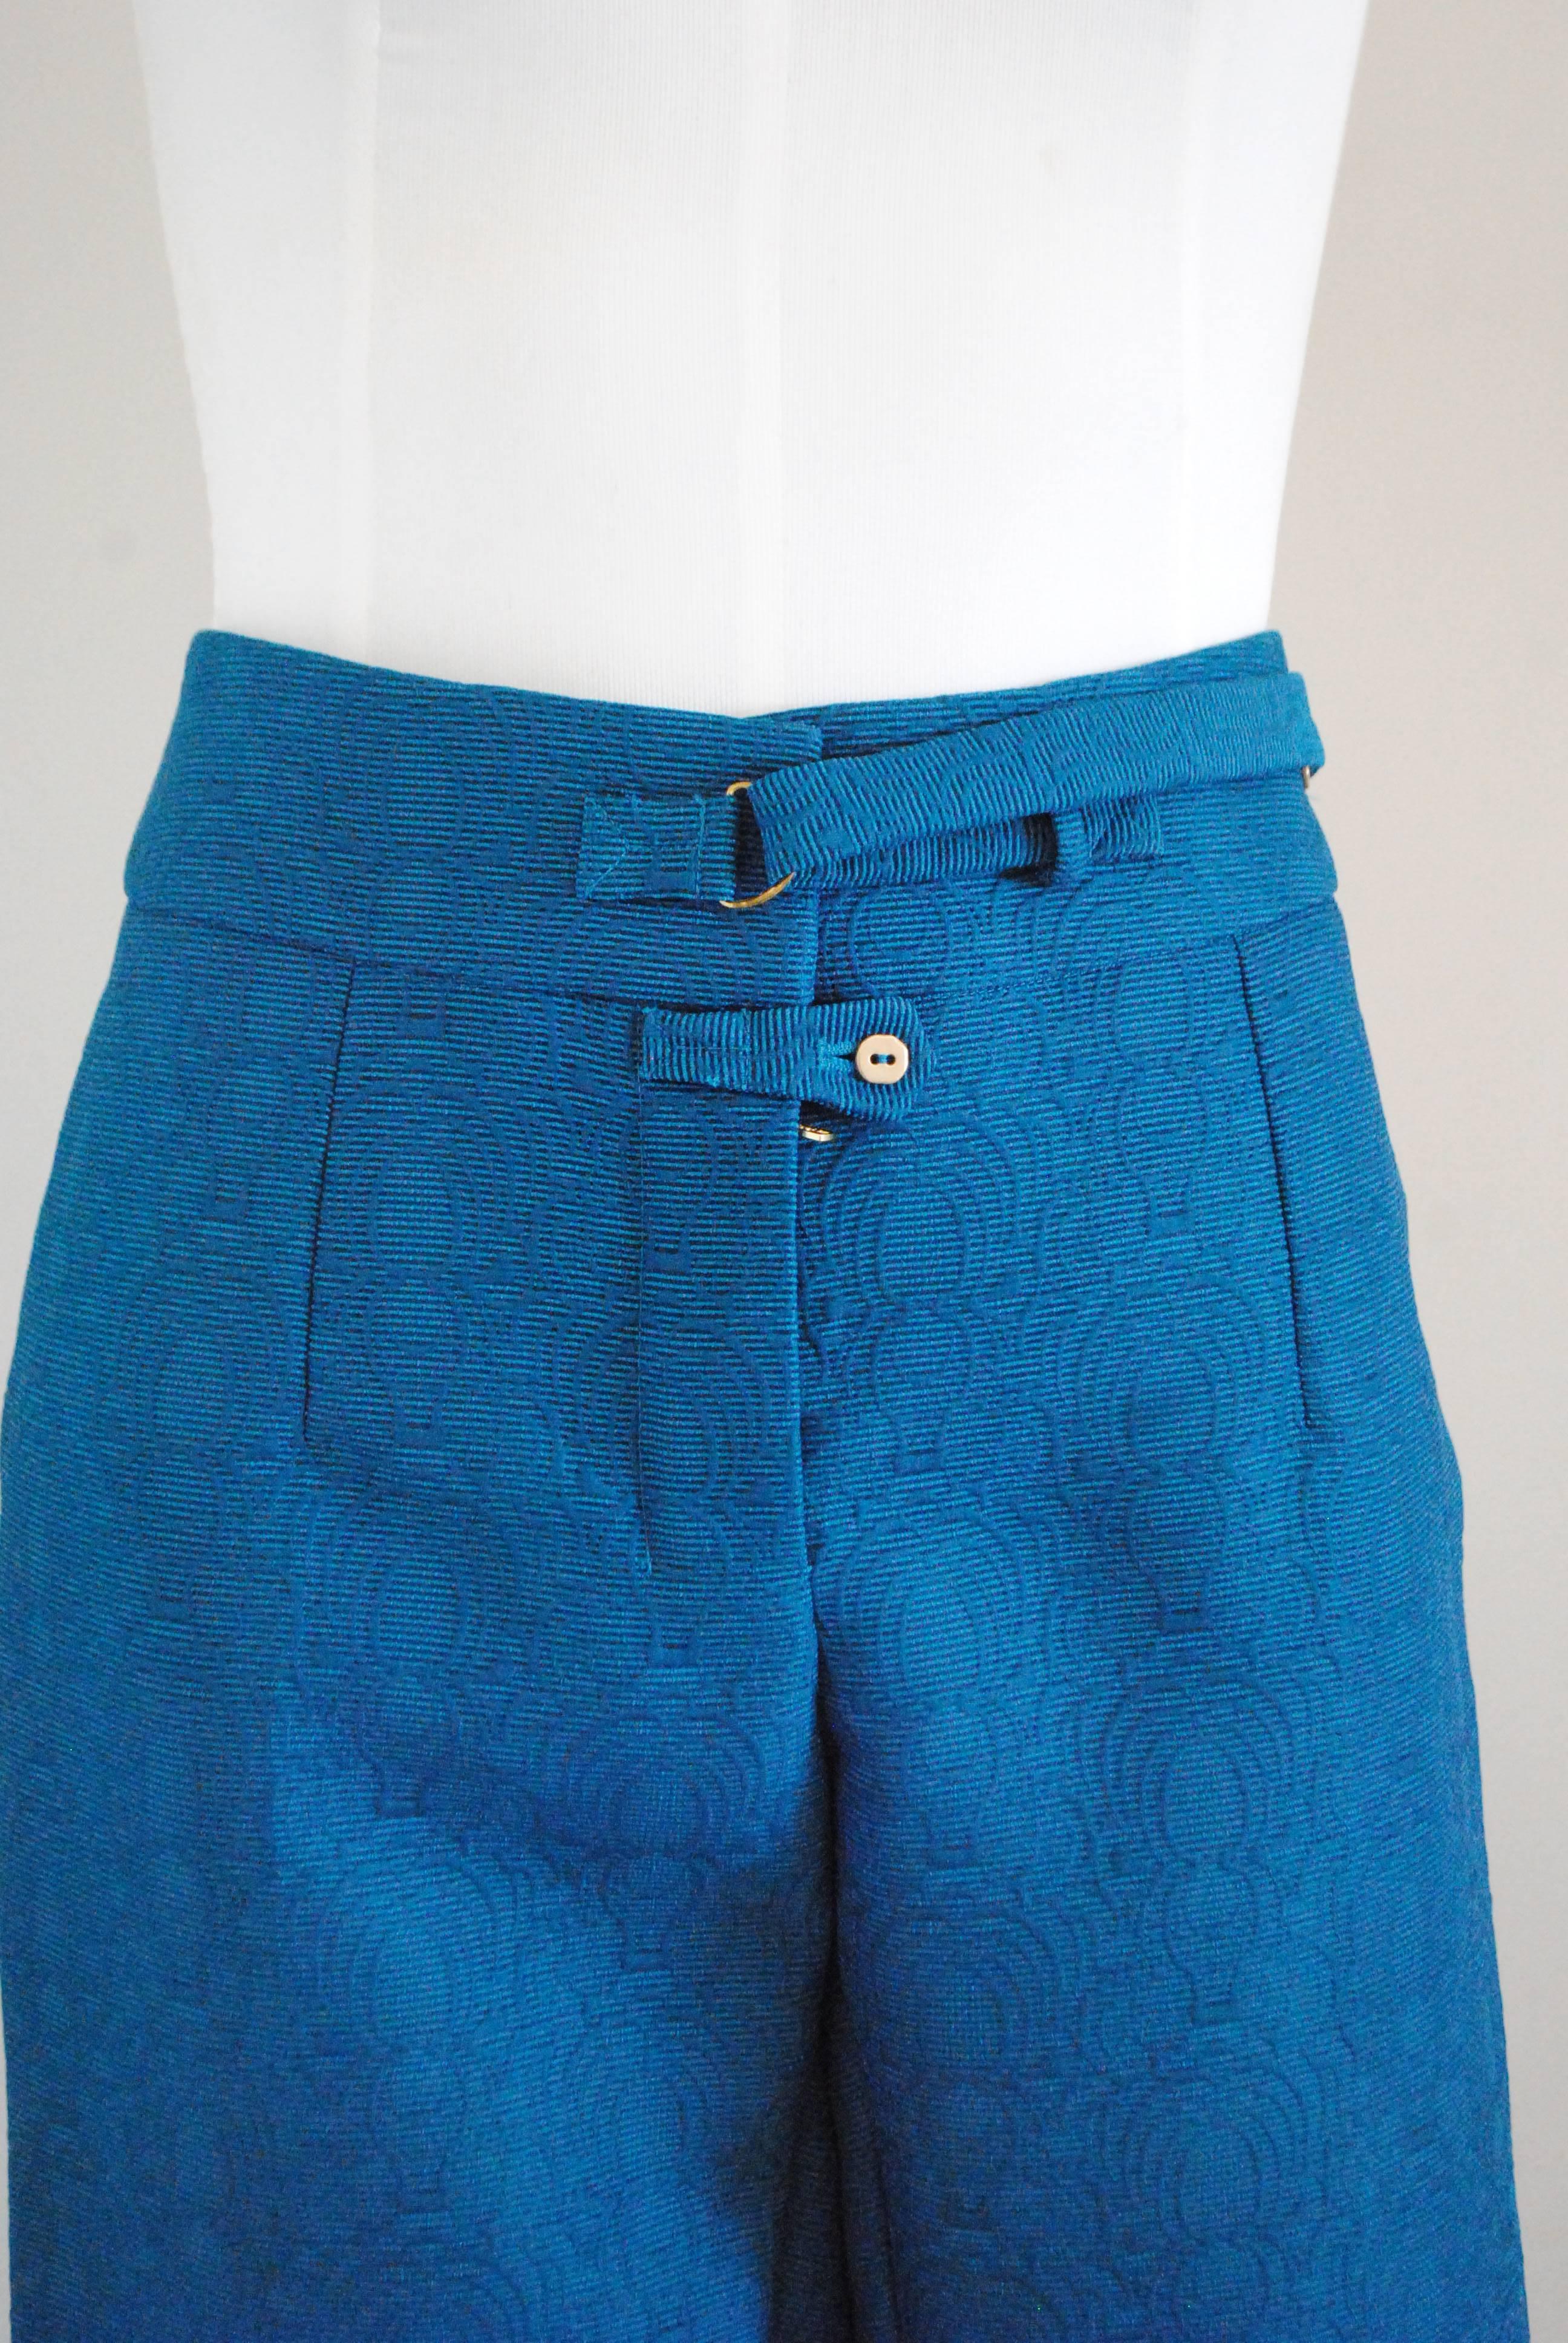 2012 Yves Saint Laurent blu pants NWOT
Totally made in italy in italian size range 42
composition: polyamide
